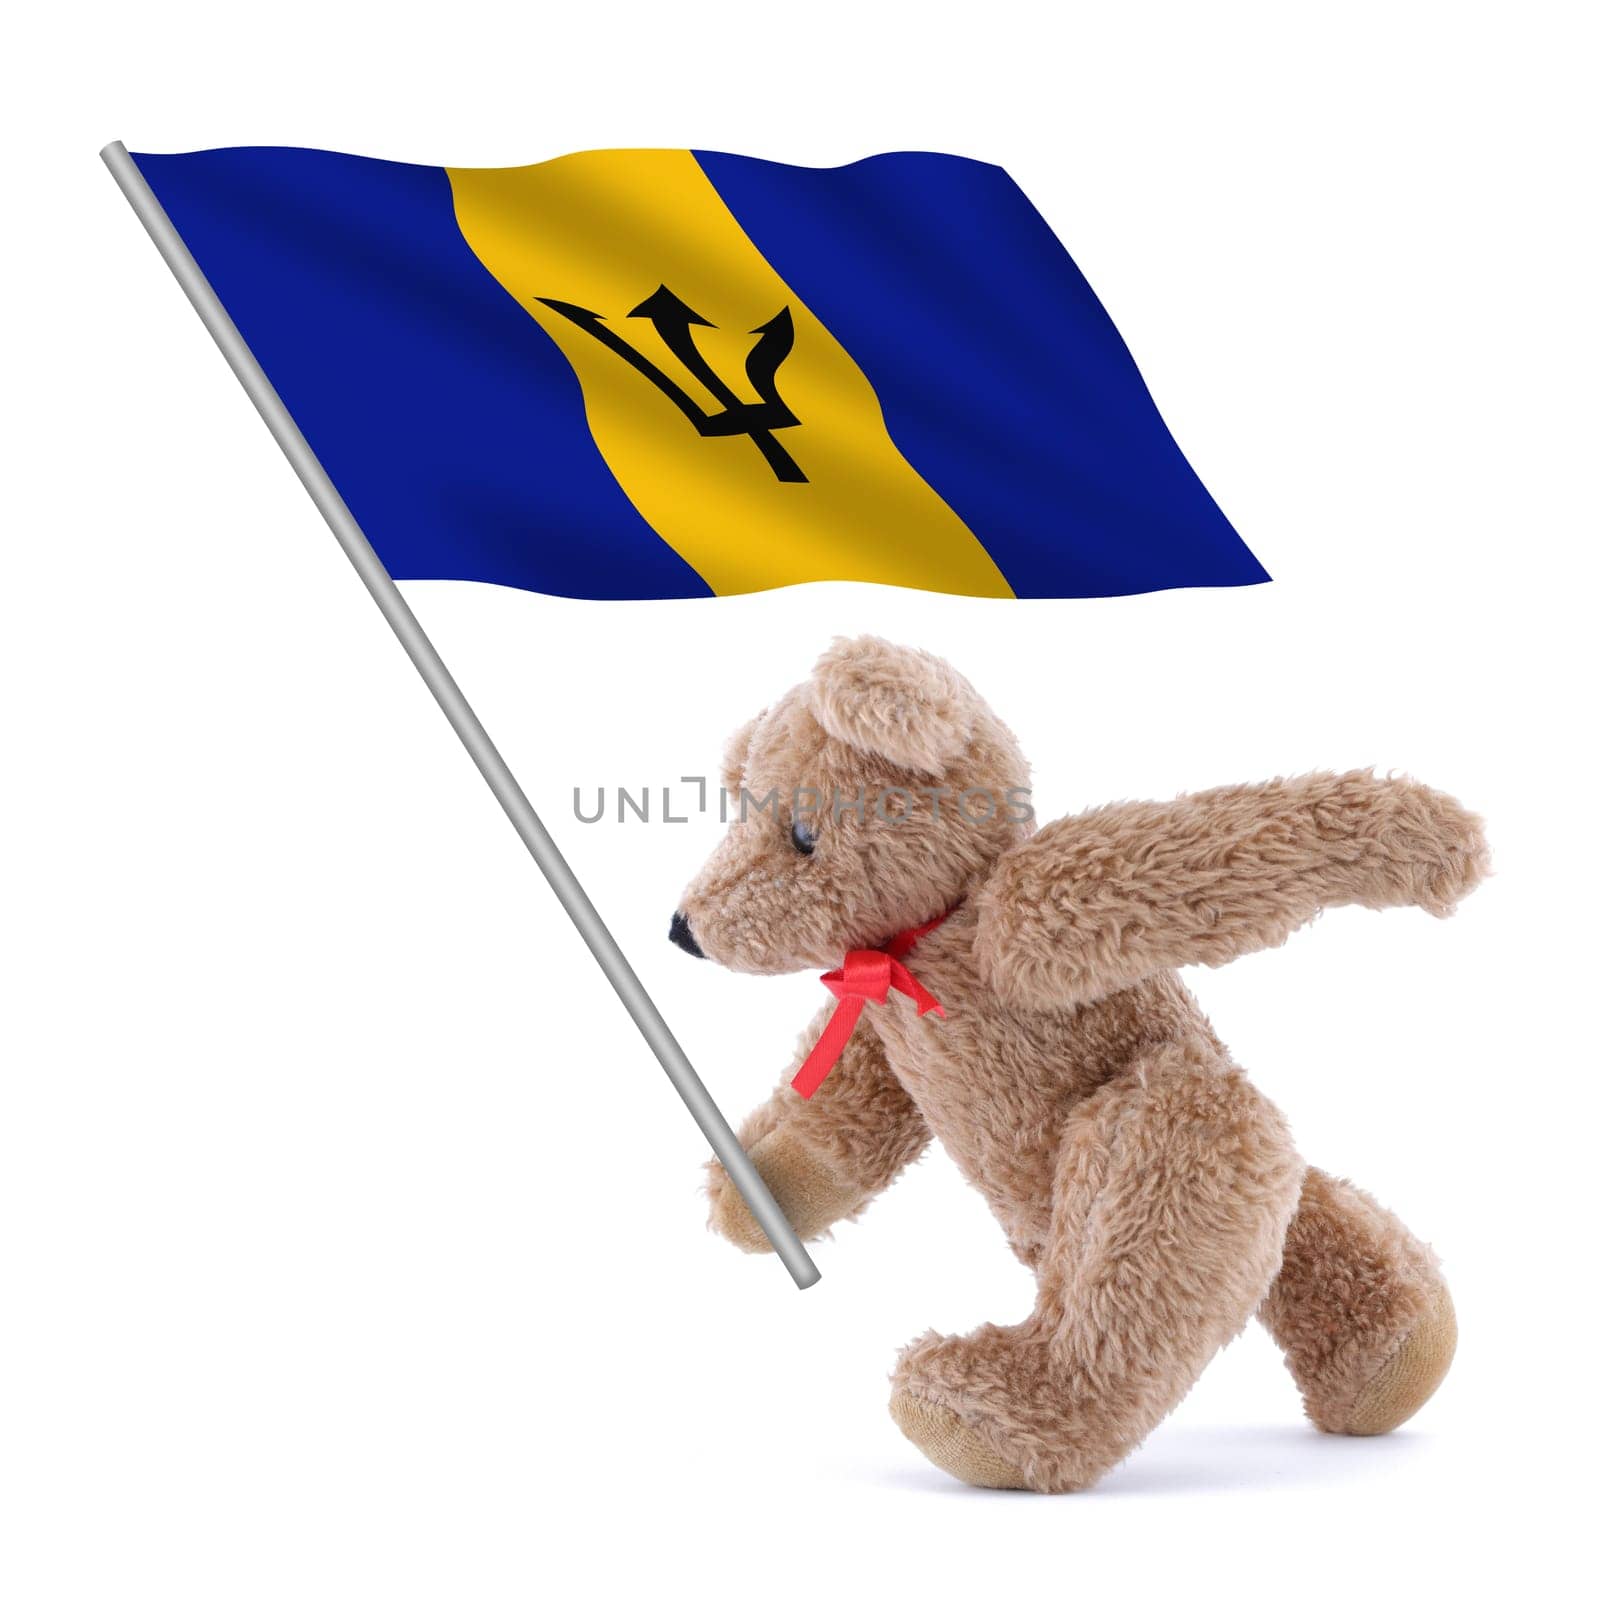 Barbados flag being carried by a cute teddy bear by VivacityImages